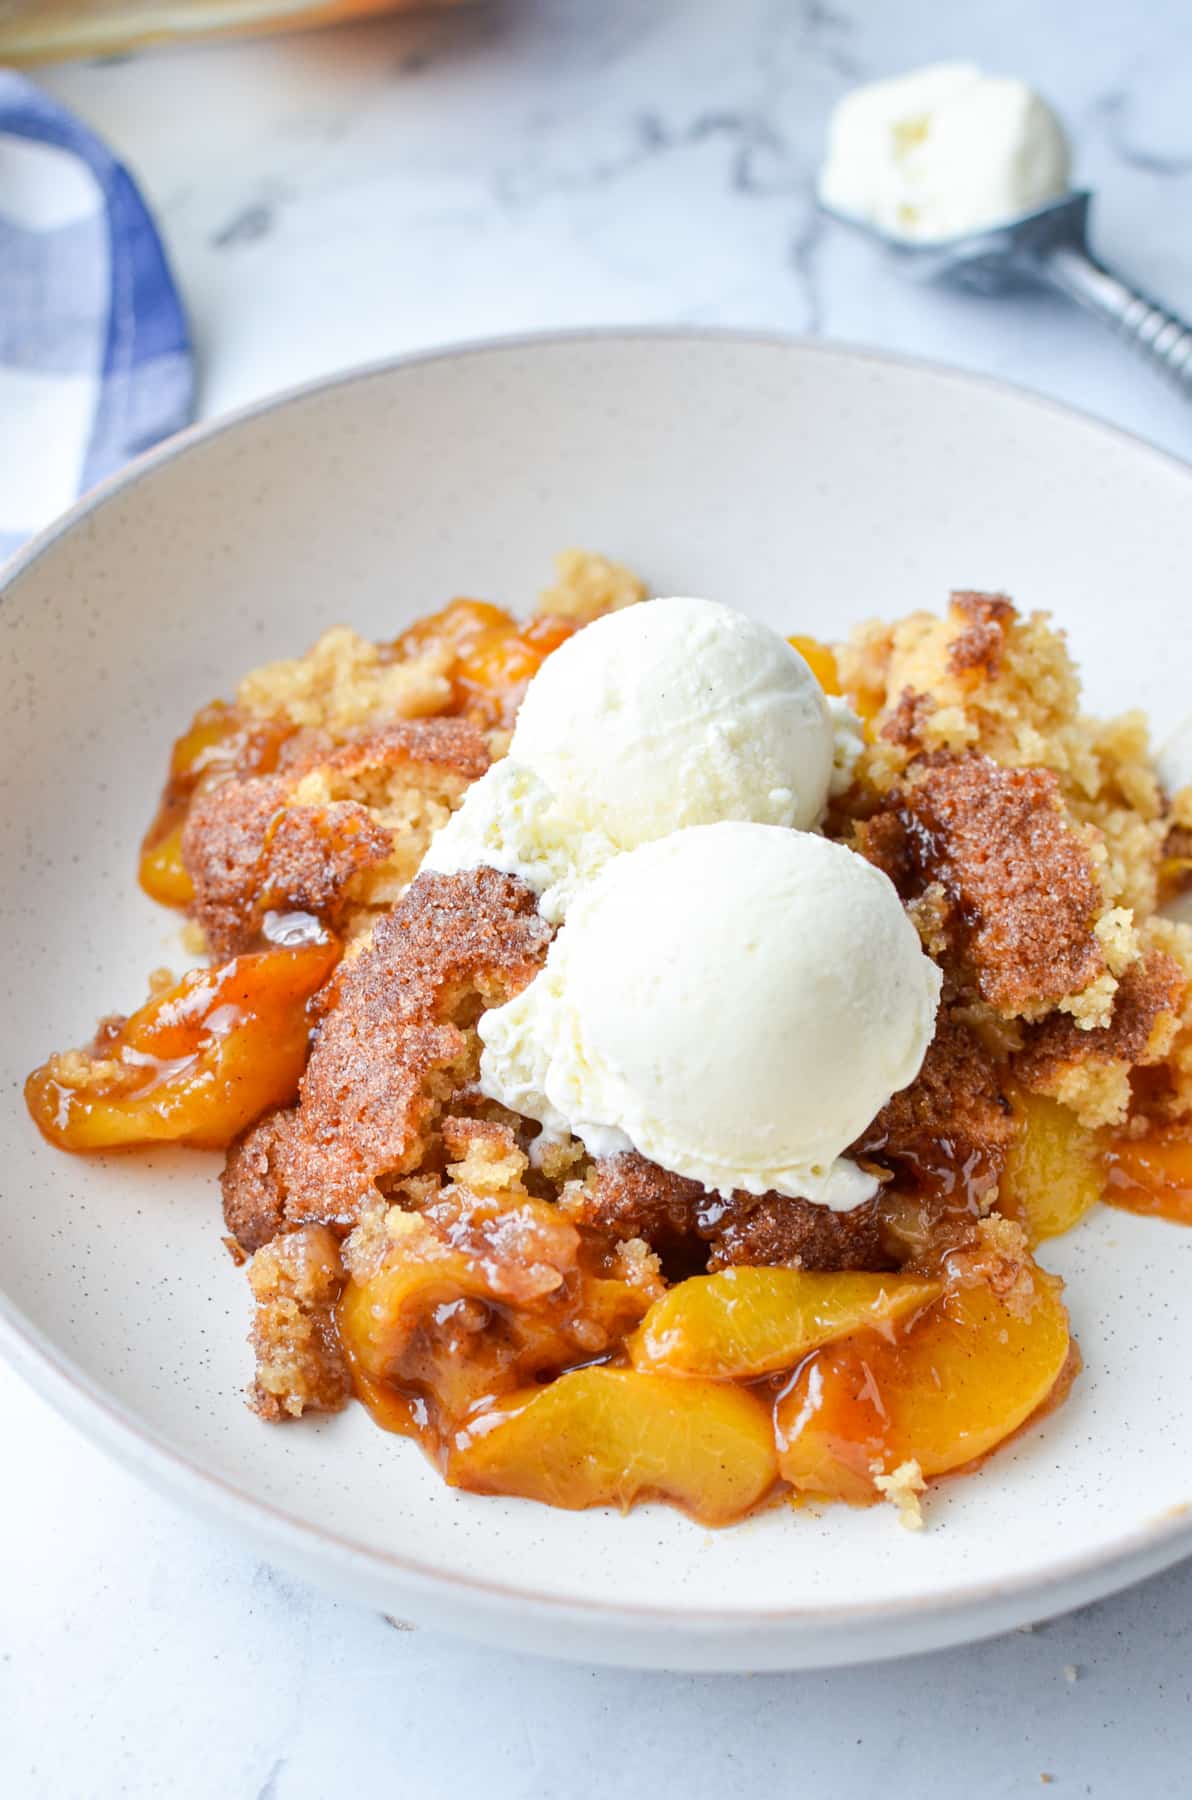 A shallow bowl of peach cobbler served with ice cream.